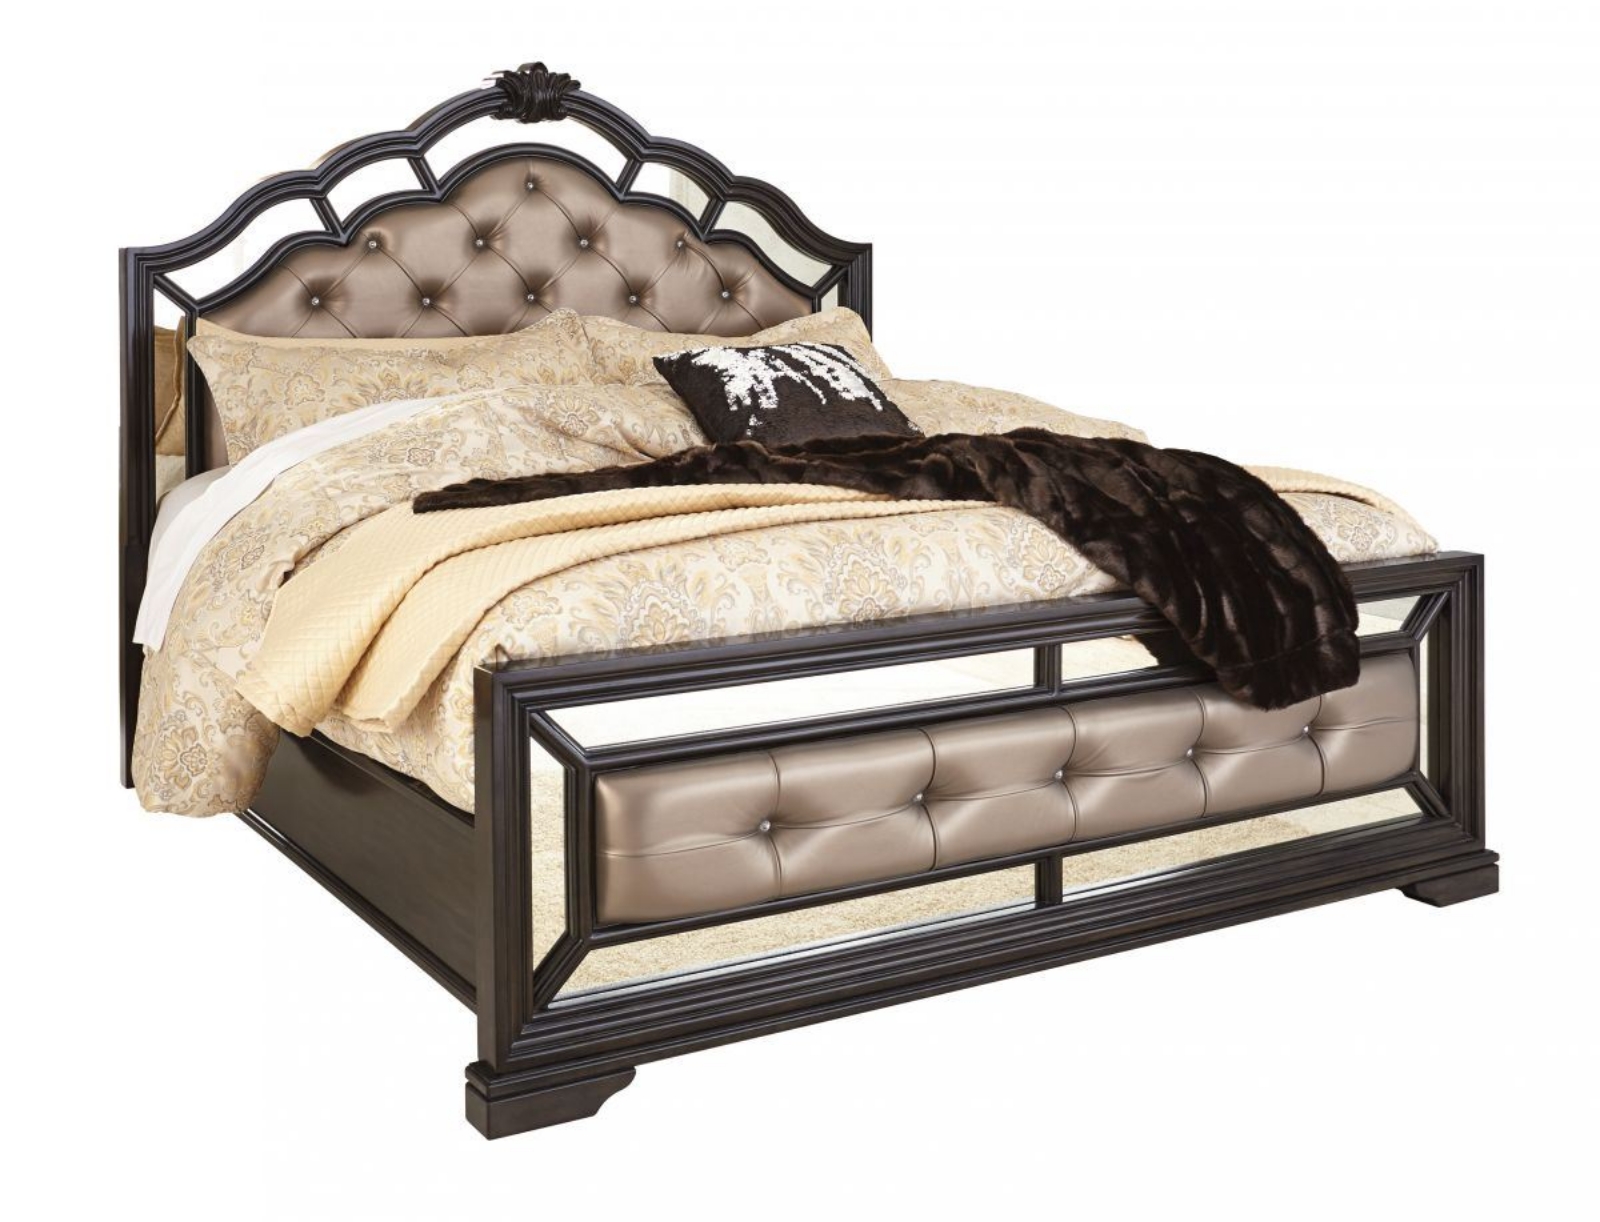 Picture of Quinshire Queen Size Bed